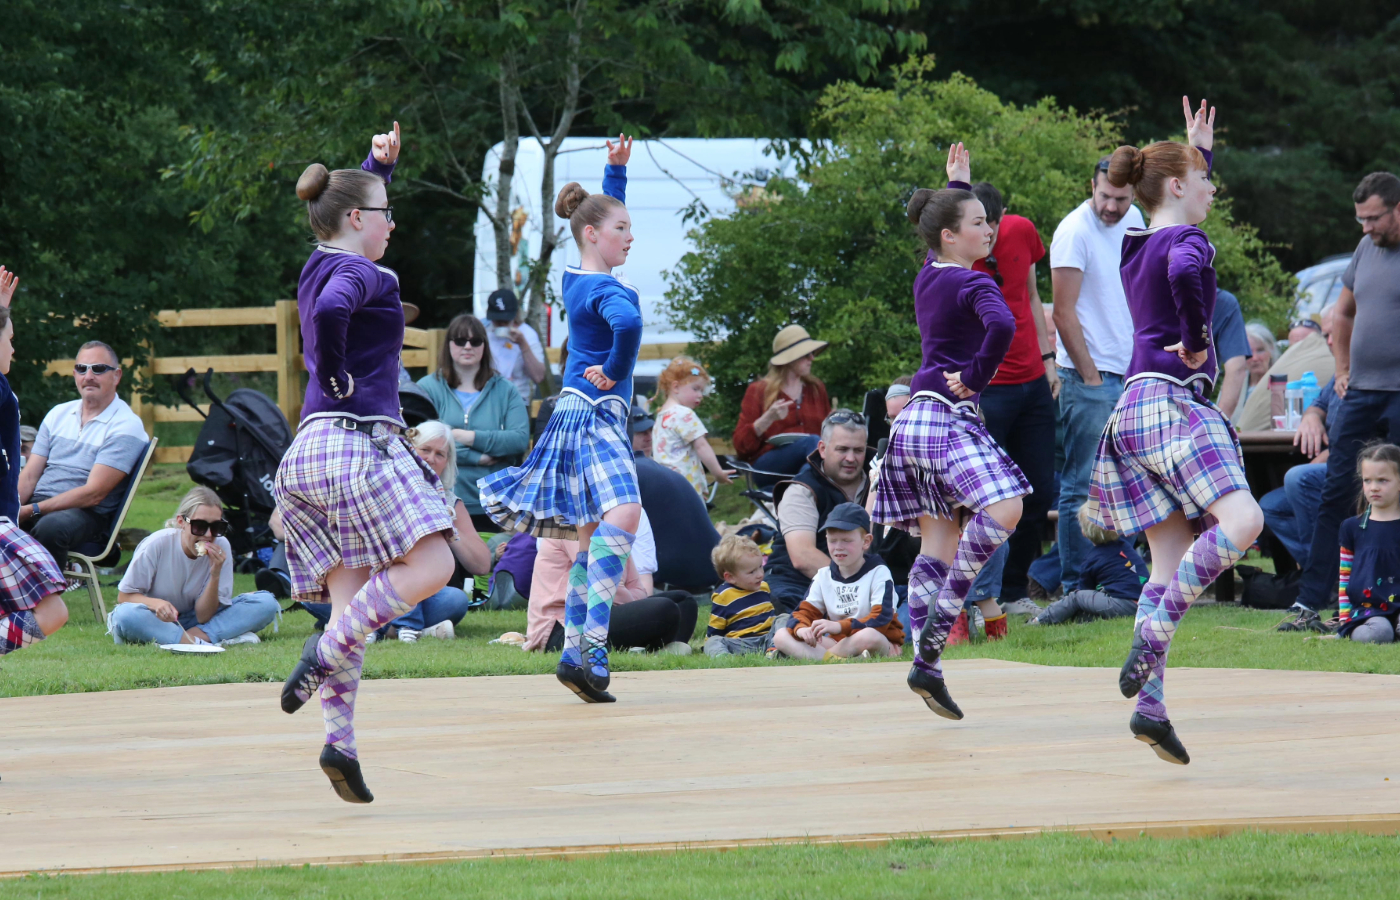 The Cabrach Picnic and Games was a staple of the Highland Games calendar and ran annually from 1877 to 1935 before being reintroduced in 2022.